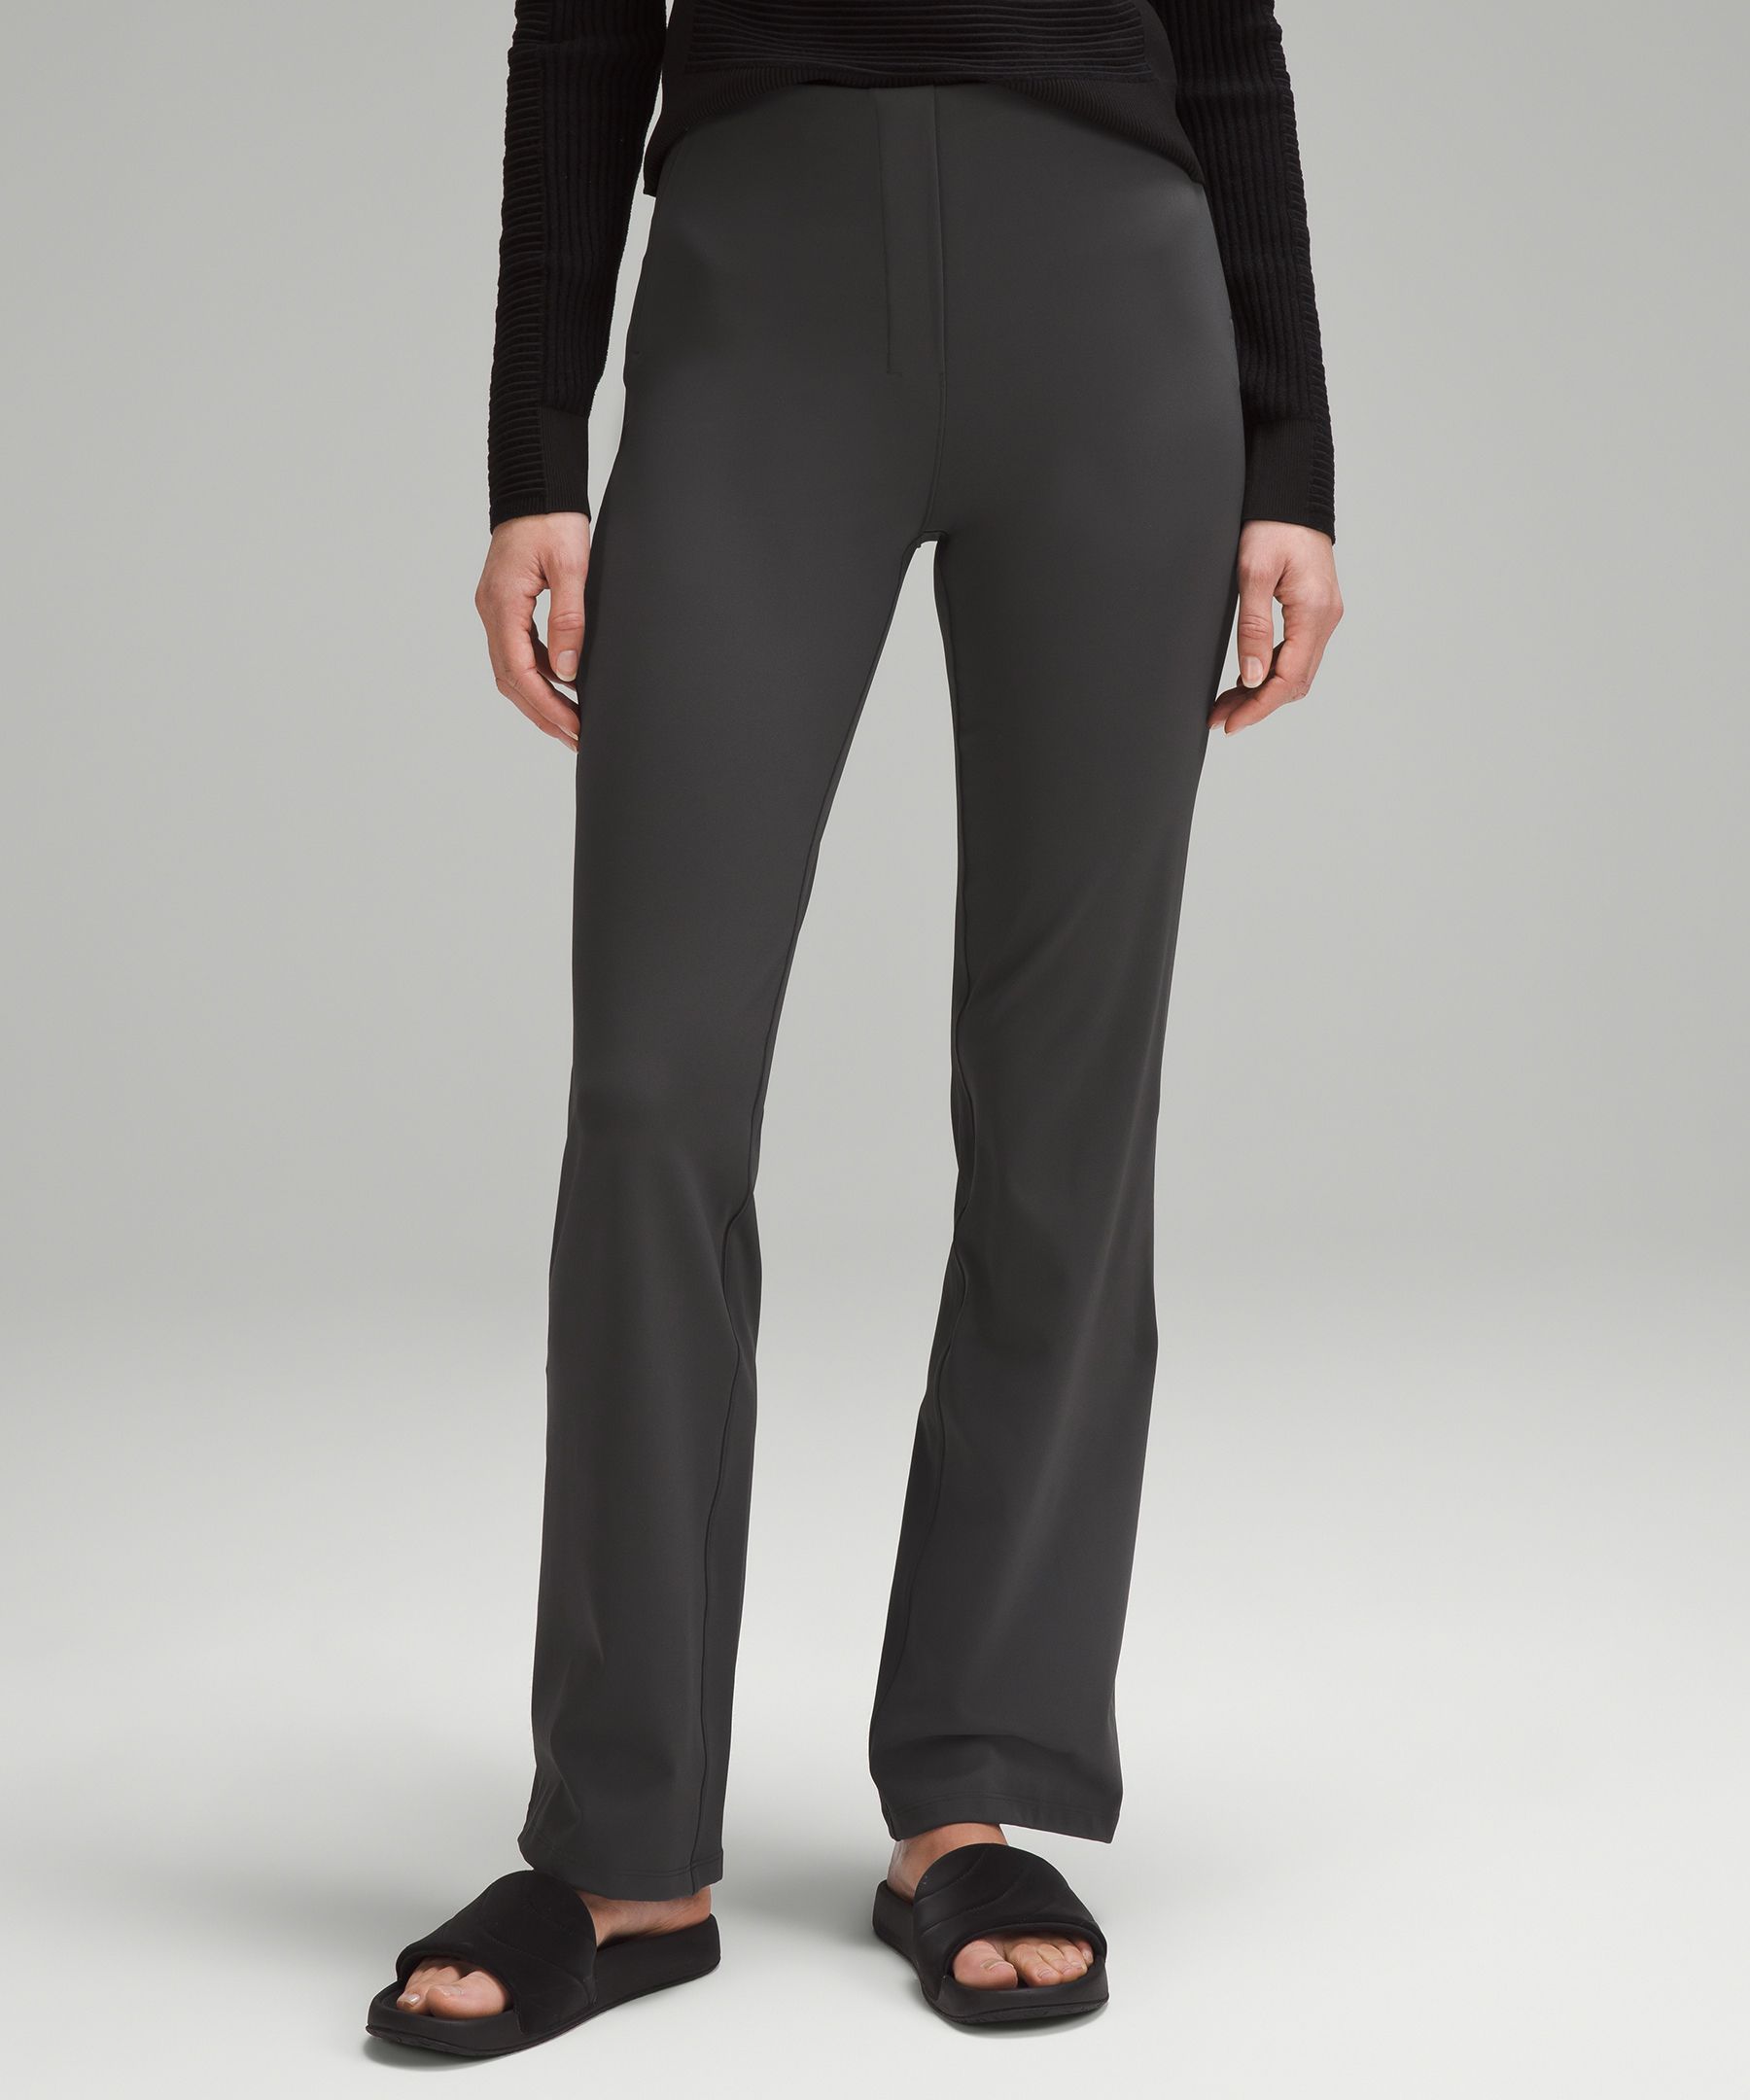 Lululemon Smooth Fit Pull-on High-rise Pants